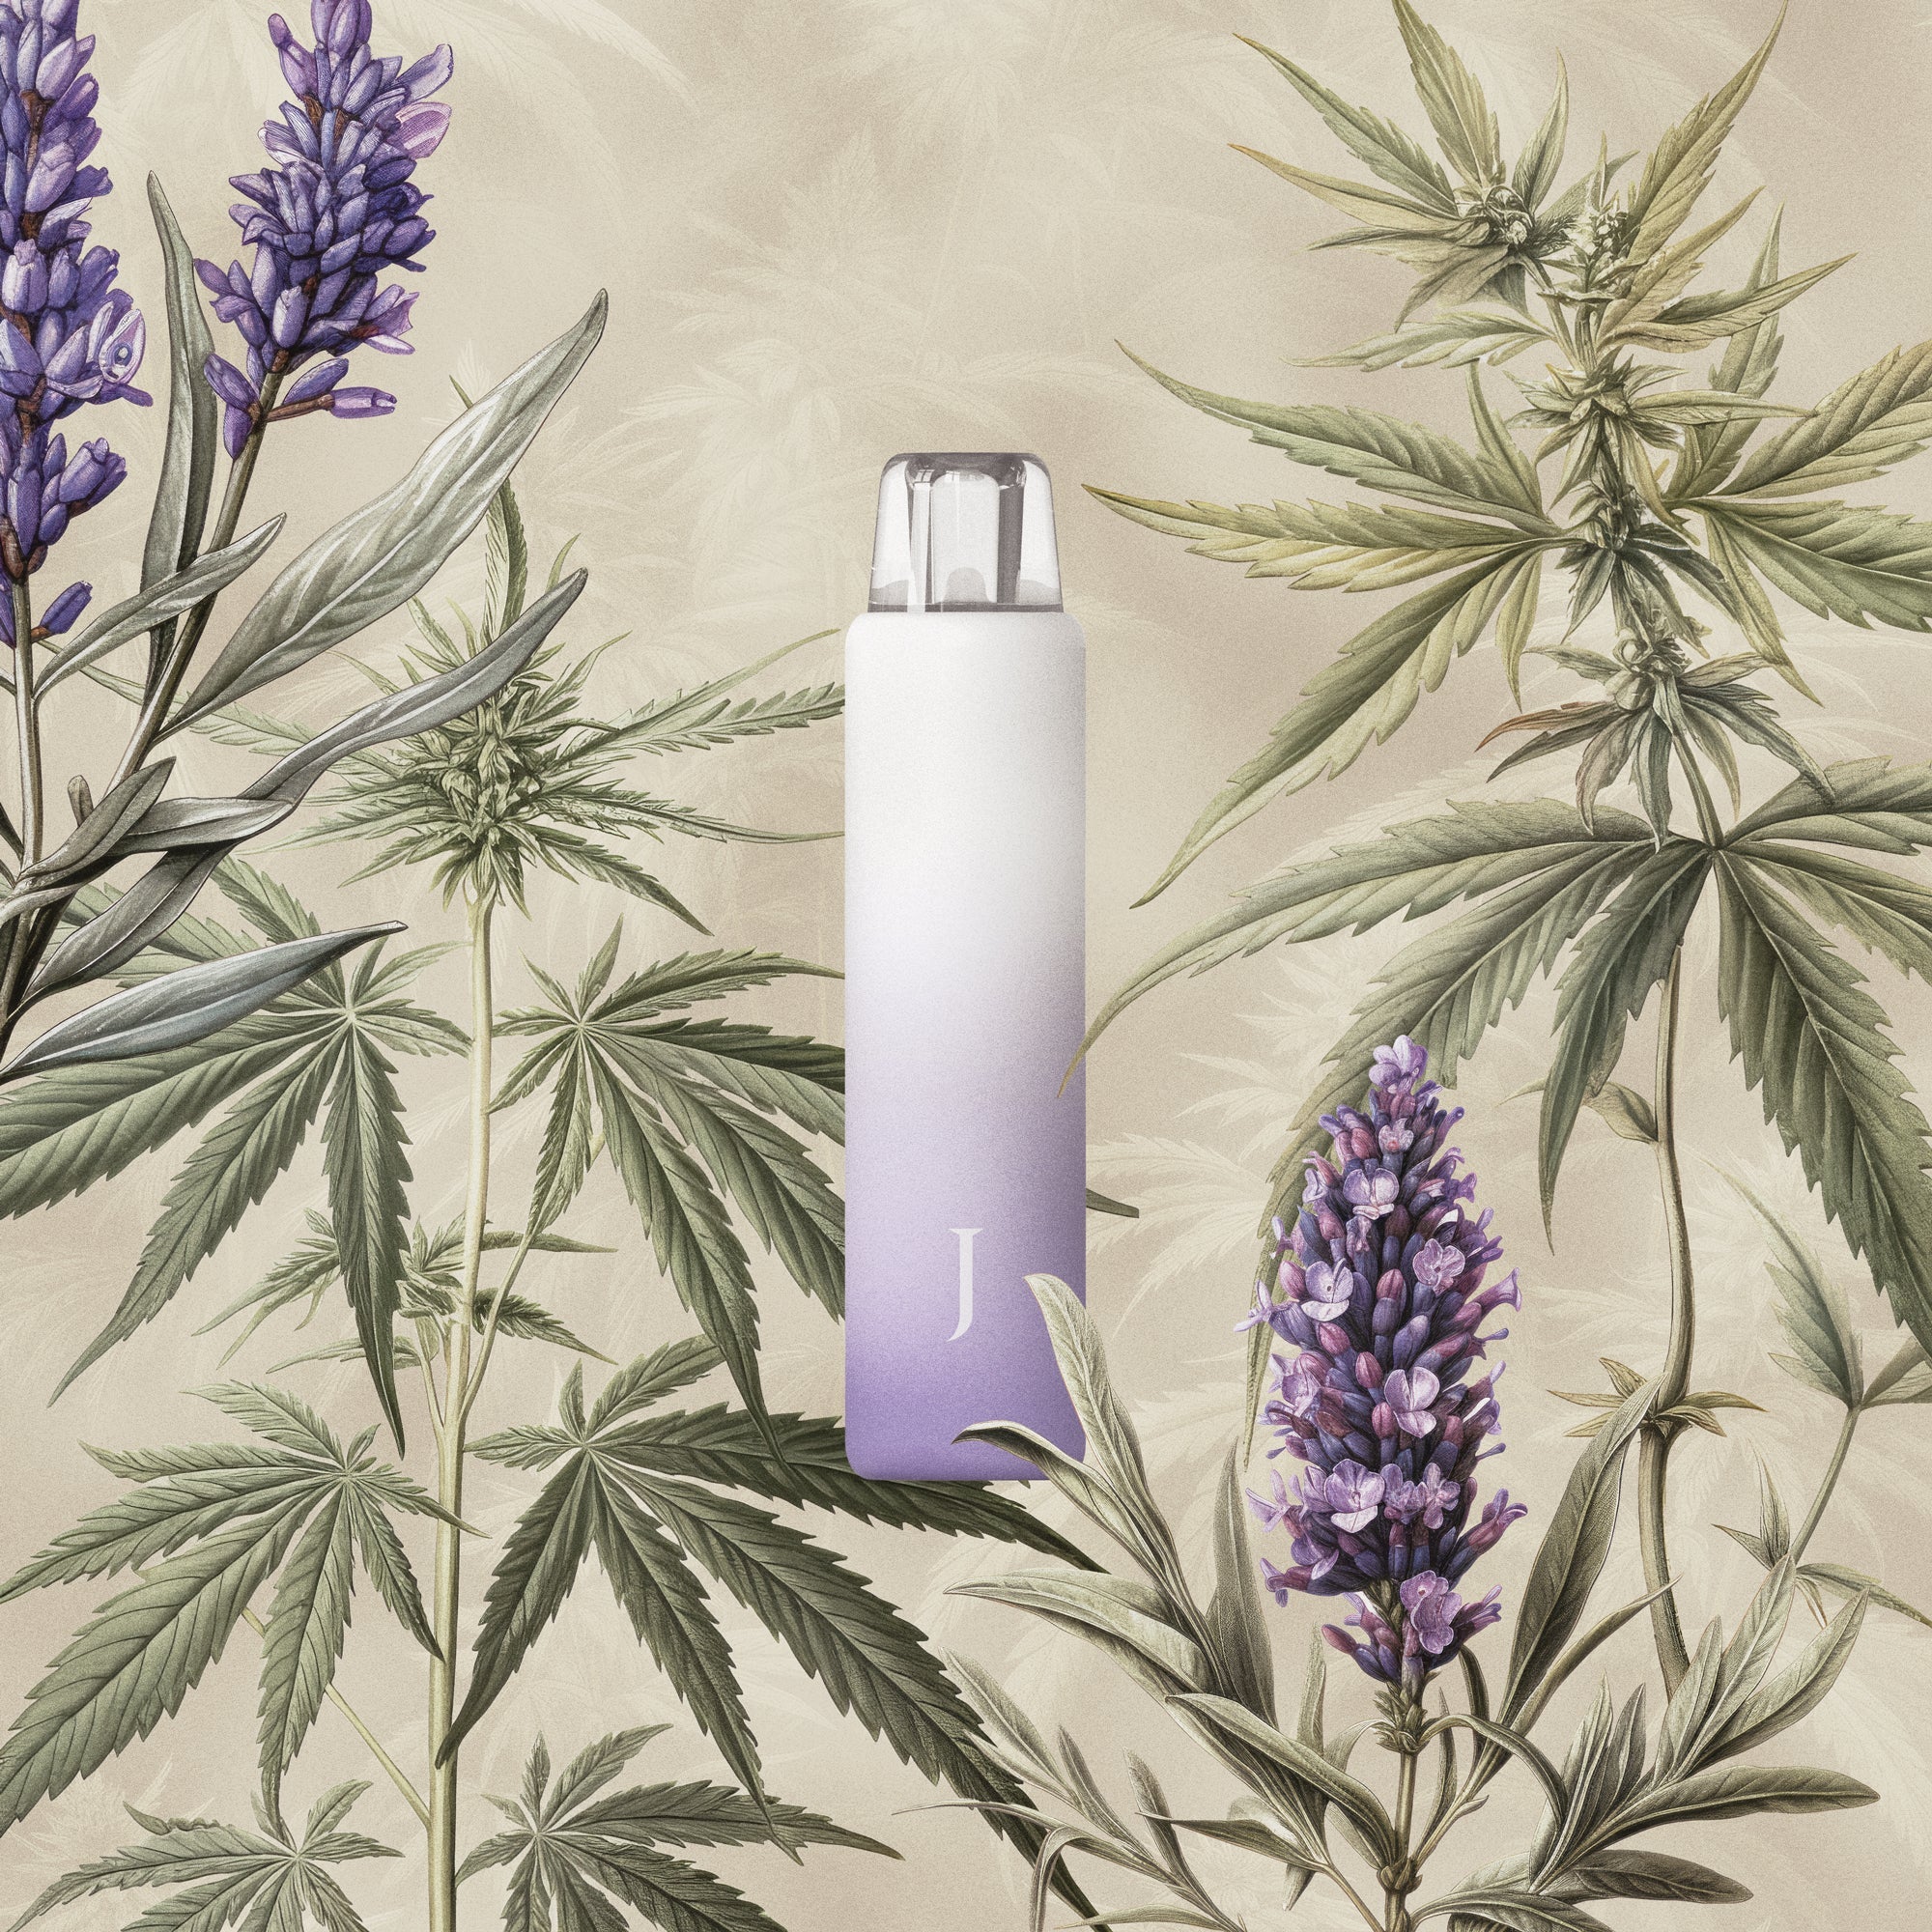 Juana All-in-One Cannabis Vape Pen with Marijuana Leaves and Lavender Botanical Illustrations